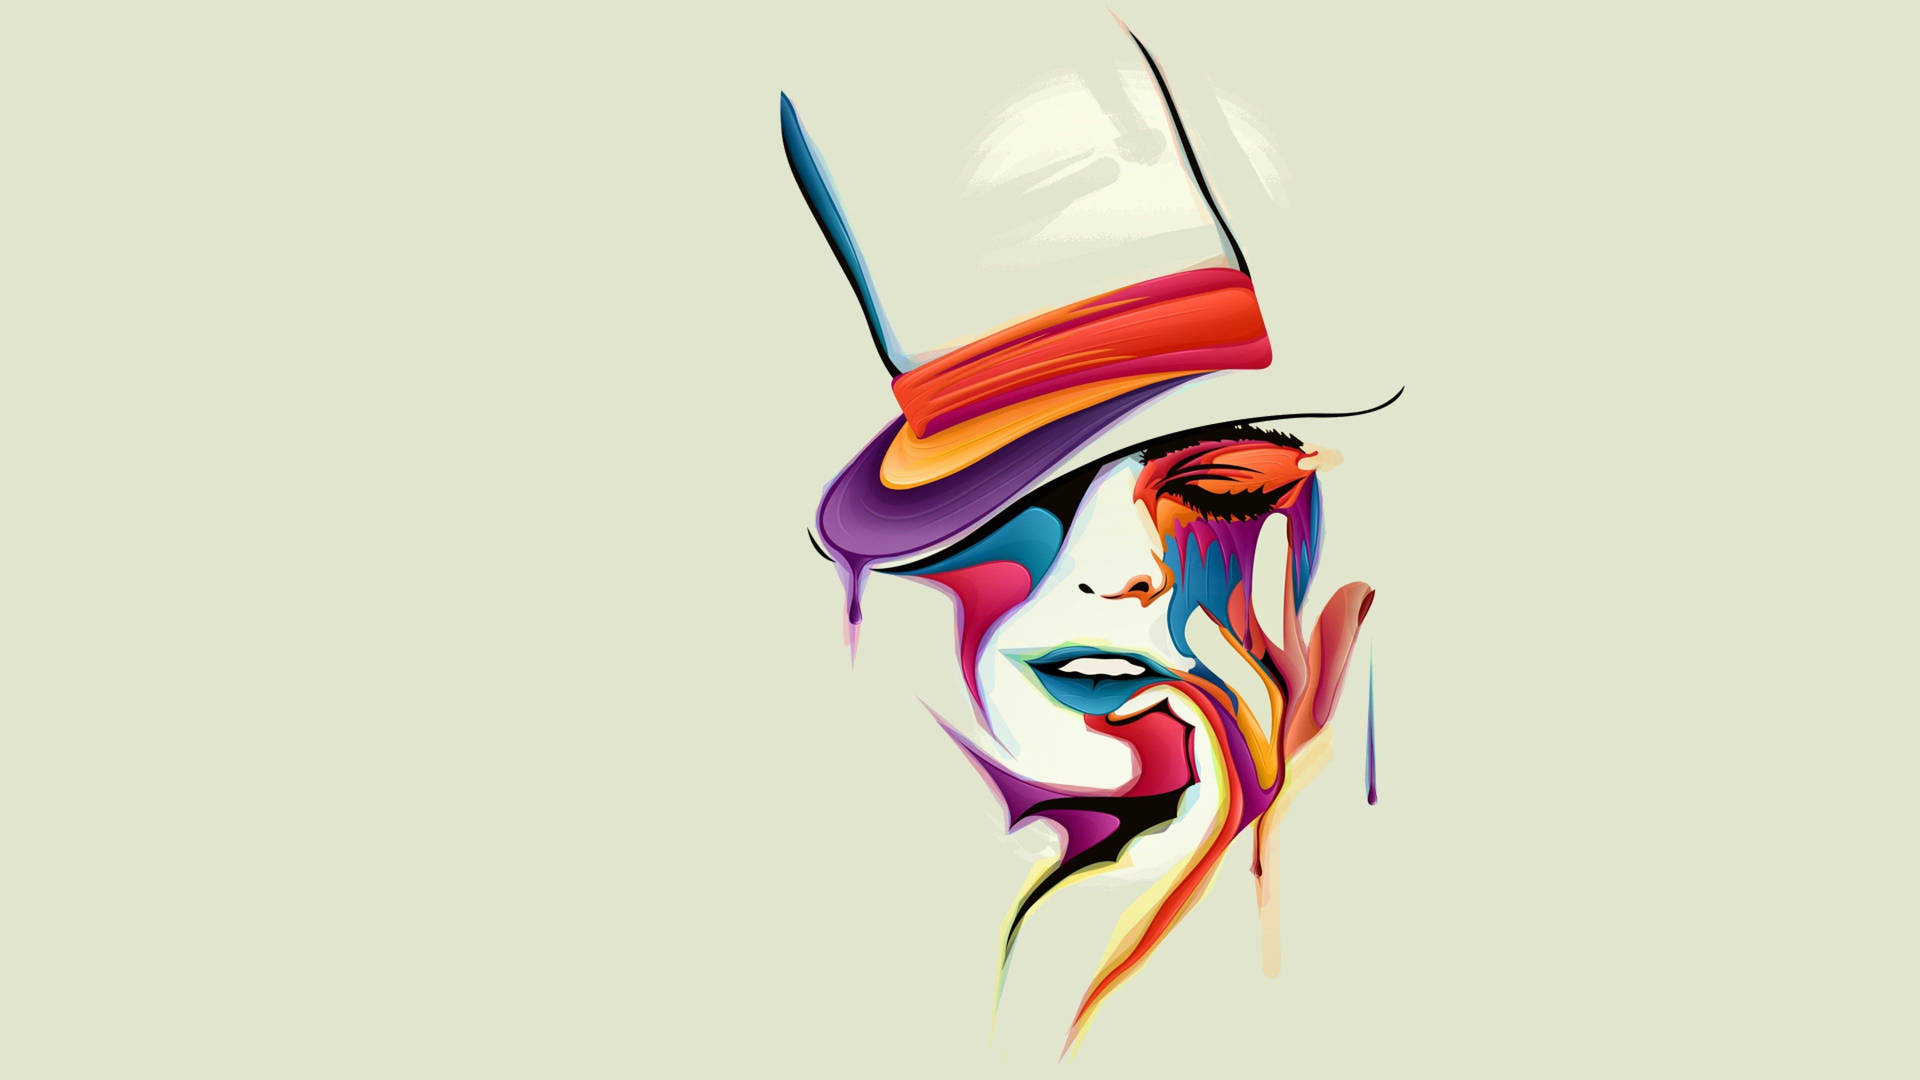 Colorful Woman's Face Illustration Wallpaper